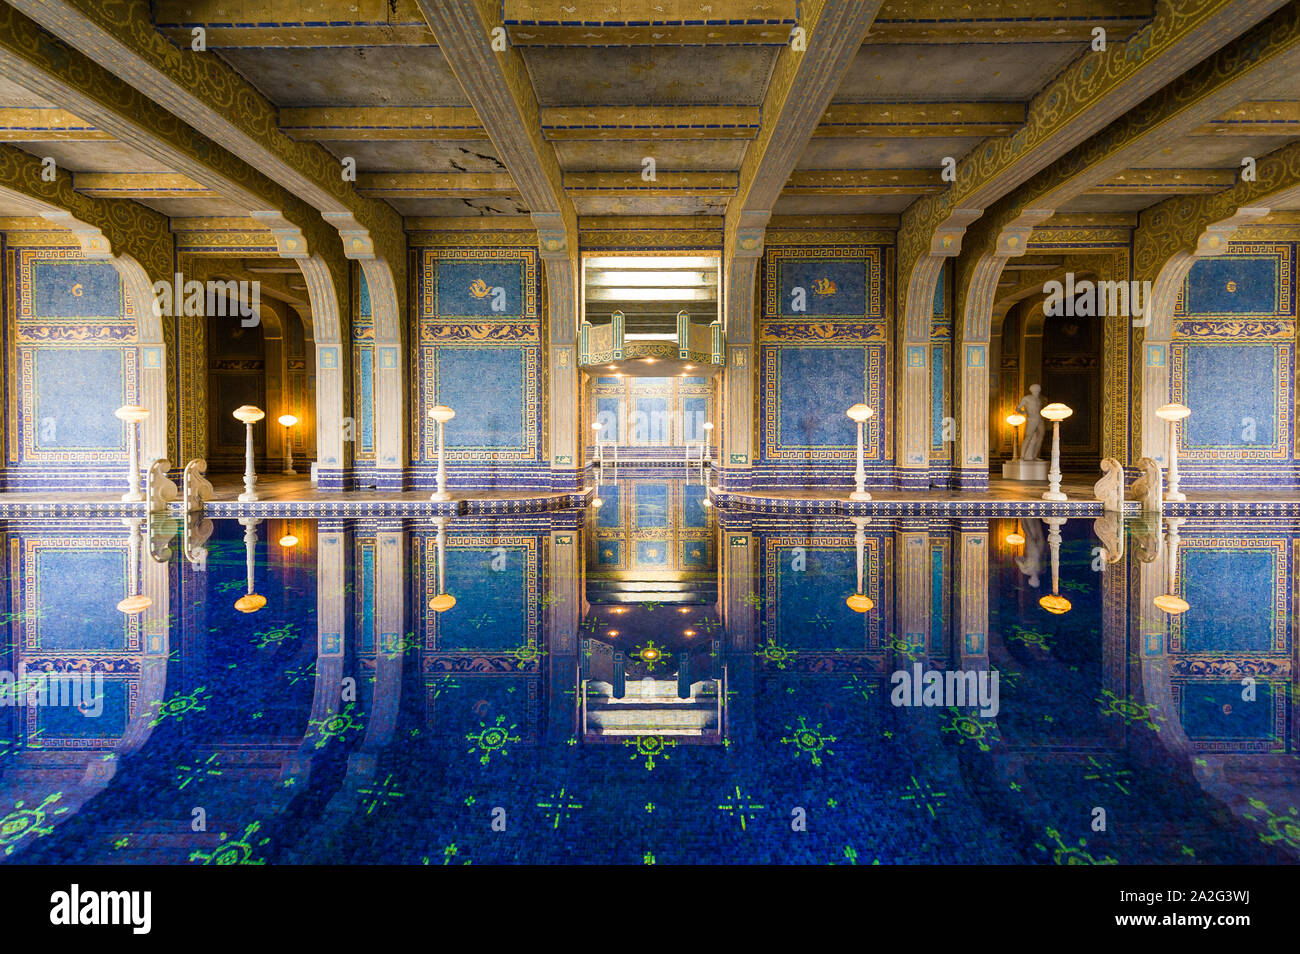 California, USA, 09 Jun 2013: Luxurious swimming pool in Hearst Castle, which is a National and California Historical Landmark opened for public tours Stock Photo